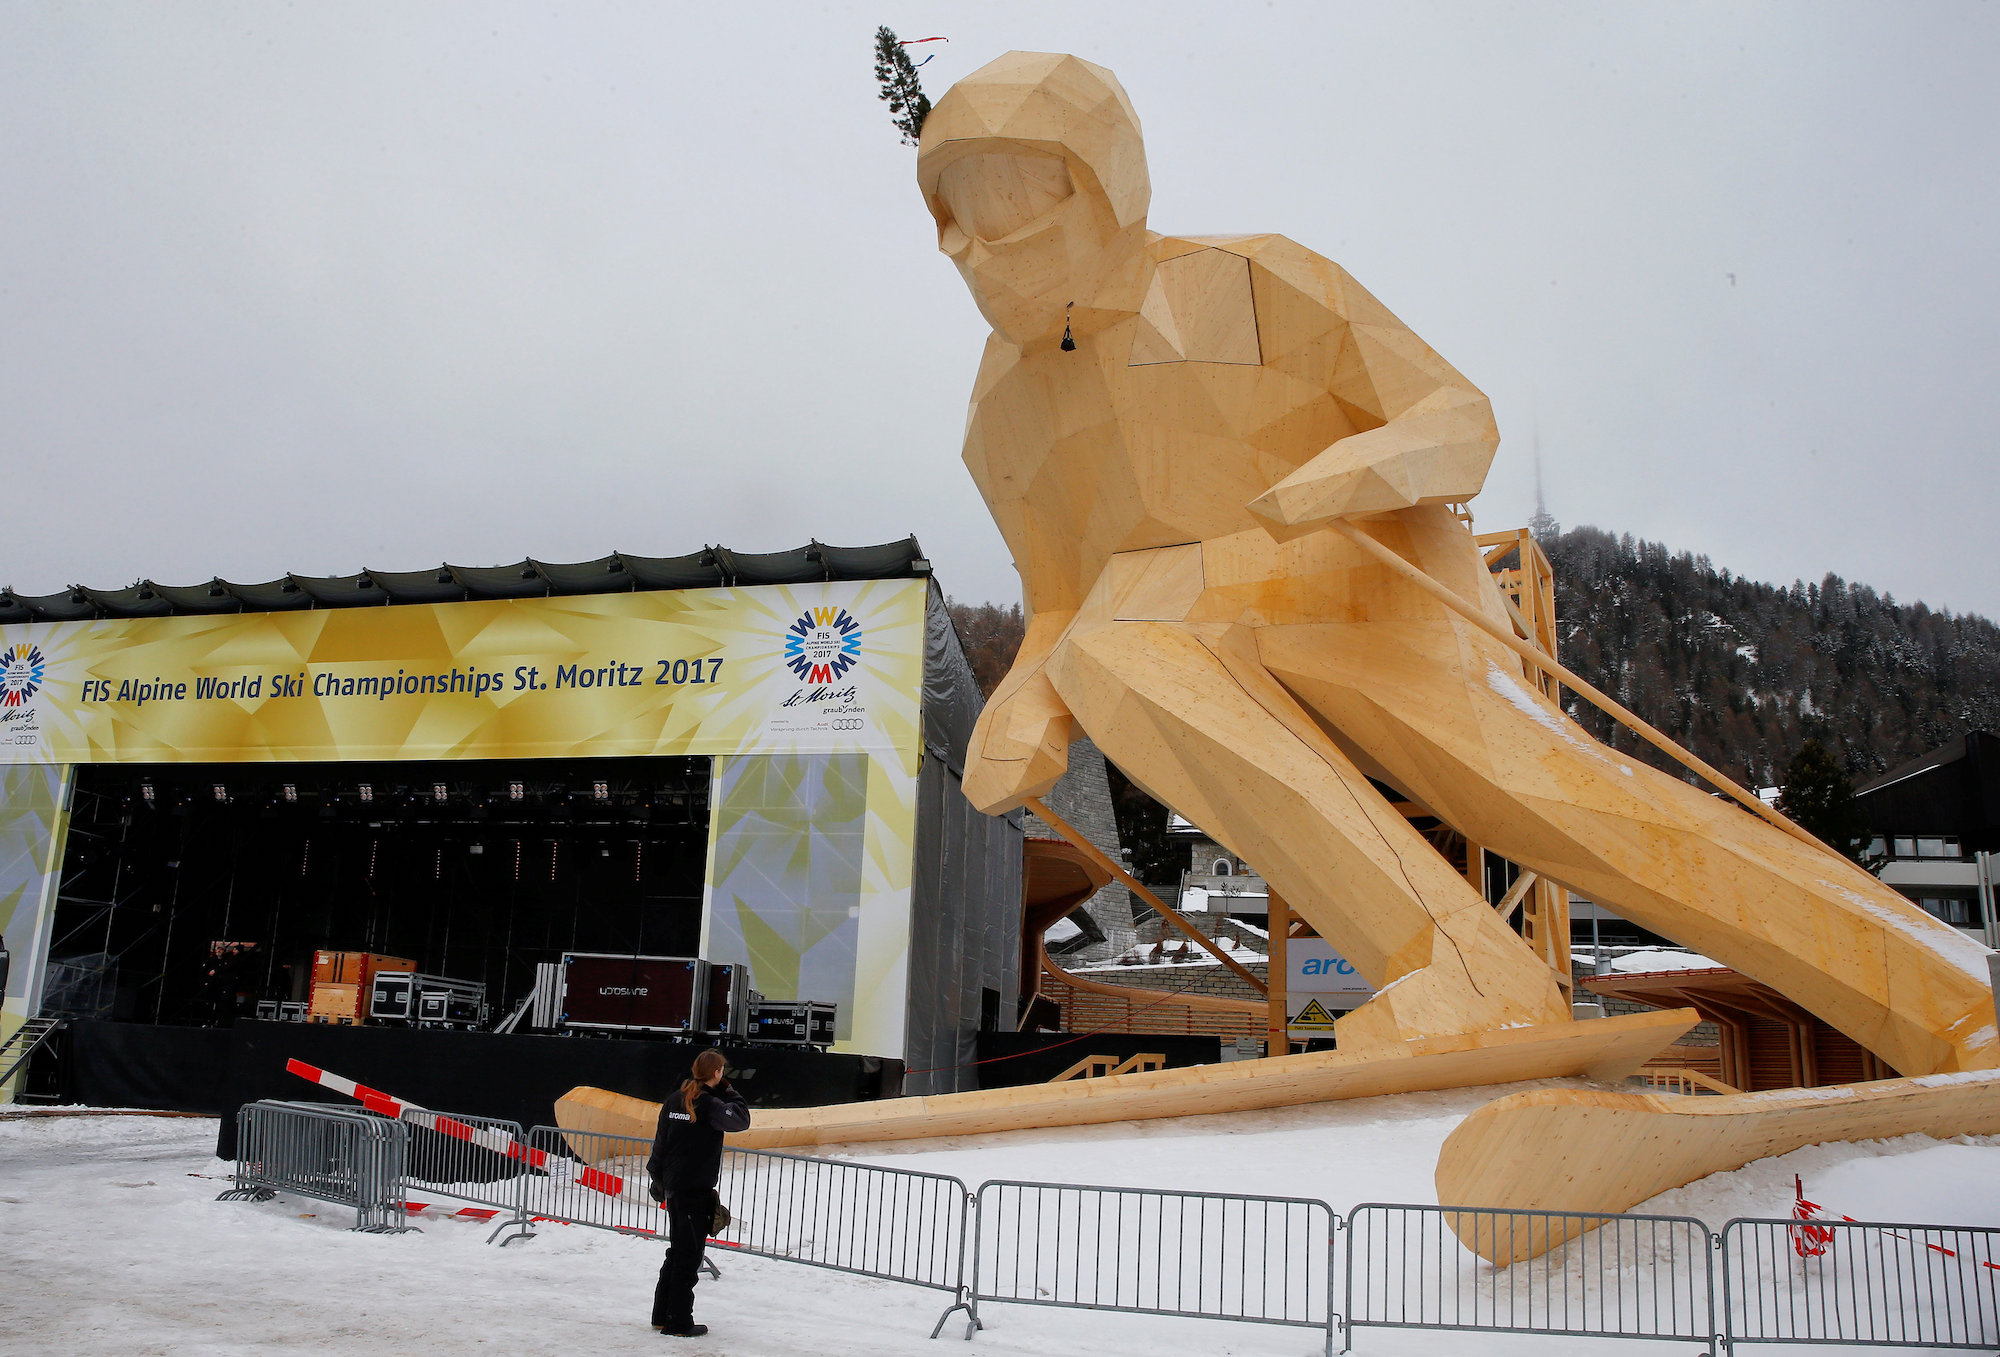 A giant wooden sculpture of a ski racer is placed beside the stage for the medal ceremonies of the upcoming FIS Alpine World Ski Championships 2017 in the mountain resort of St. Moritz, Switzerland February 2, 2017. REUTERS/Arnd Wiegmann